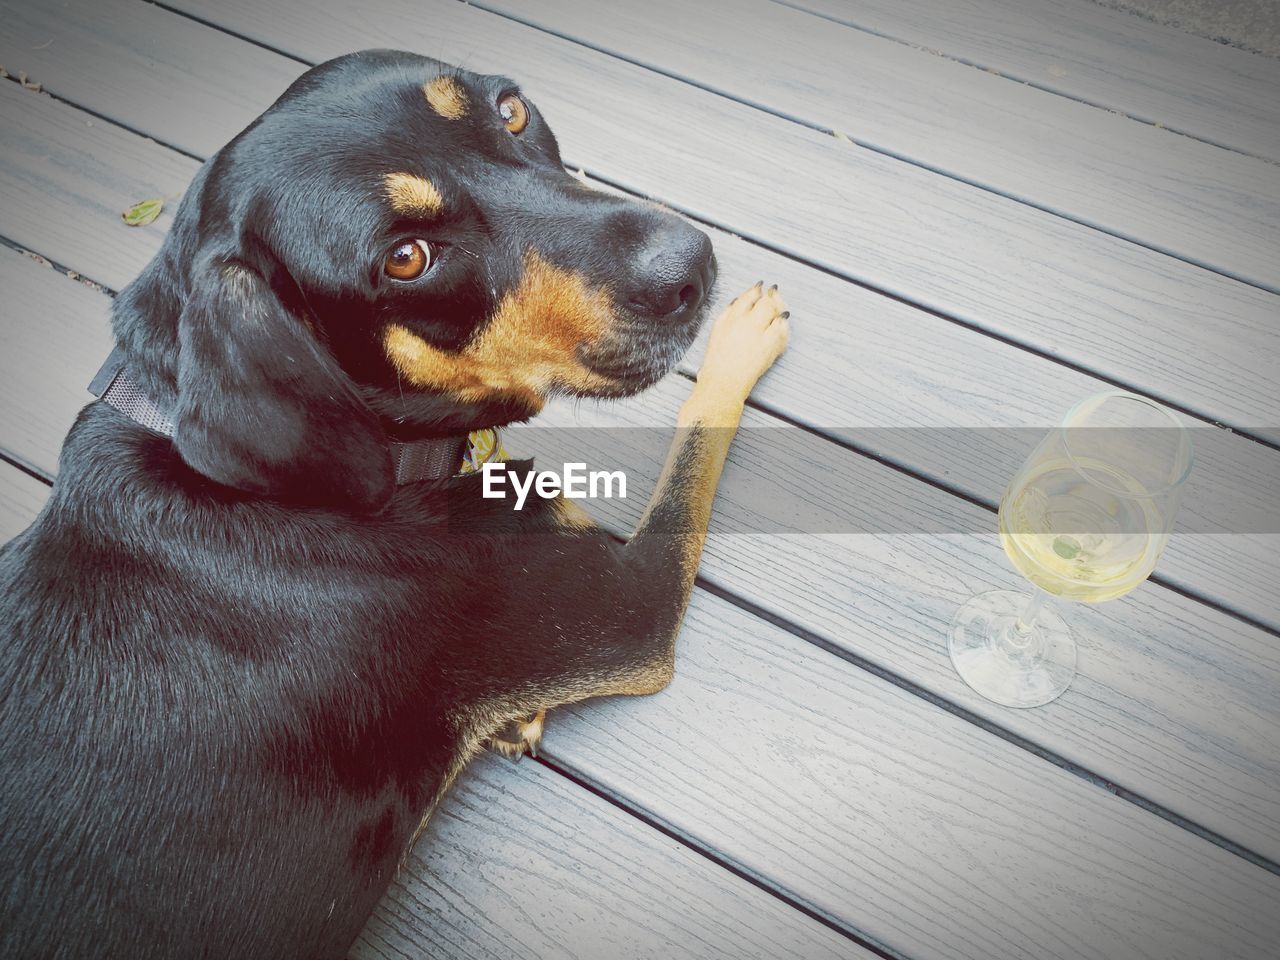 HIGH ANGLE VIEW OF DOG LOOKING AT WOODEN TABLE